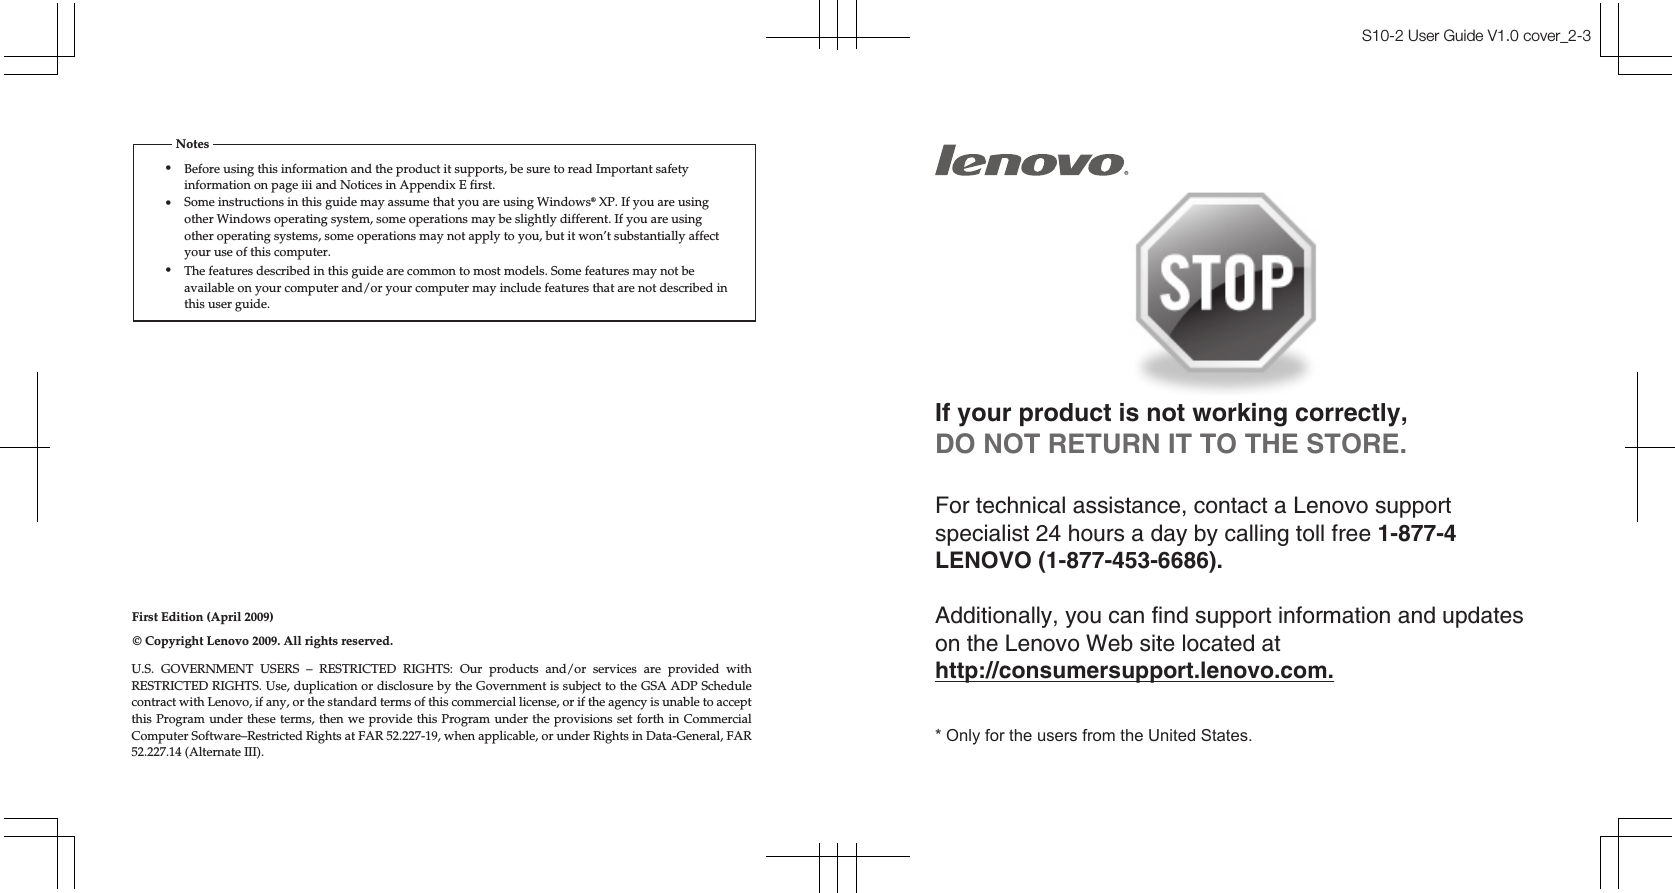 First Edition (April 2009)•Notes© Copyright Lenovo 2009. All rights reserved.S10-2 User Guide V1.0 cover_2-3If your product is not working correctly, DO NOT RETURN IT TO THE STORE.For technical assistance, contact a Lenovo support specialist 24 hours a day by calling toll free 1-877-4 LENOVO (1-877-453-6686).   Additionally, you can find support information and updates on the Lenovo Web site located at http://consumersupport.lenovo.com.* Only for the users from the United States.Before using this information and the product it supports, be sure to read Important safety information on page iii and Notices in Appendix E first.•Some instructions in this guide may assume that you are using Windows® XP. If you are using other Windows operating system, some operations may be slightly different. If you are using other operating systems, some operations may not apply to you, but it won’t substantially affect your use of this computer.•The features described in this guide are common to most models. Some features may not be available on your computer and/or your computer may include features that are not described in this user guide.U.S.  GOVERNMENT  USERS  –  RESTRICTED  RIGHTS:  Our  products  and/or  services  are  provided  with RESTRICTED RIGHTS. Use, duplication or disclosure by the Government is subject to the GSA ADP Schedule contract with Lenovo, if any, or the standard terms of this commercial license, or if the agency is unable to accept this Program under these  terms, then we provide  this Program under the  provisions set forth in  Commercial Computer Software–Restricted Rights at FAR 52.227-19, when applicable, or under Rights in Data-General, FAR 52.227.14 (Alternate III).